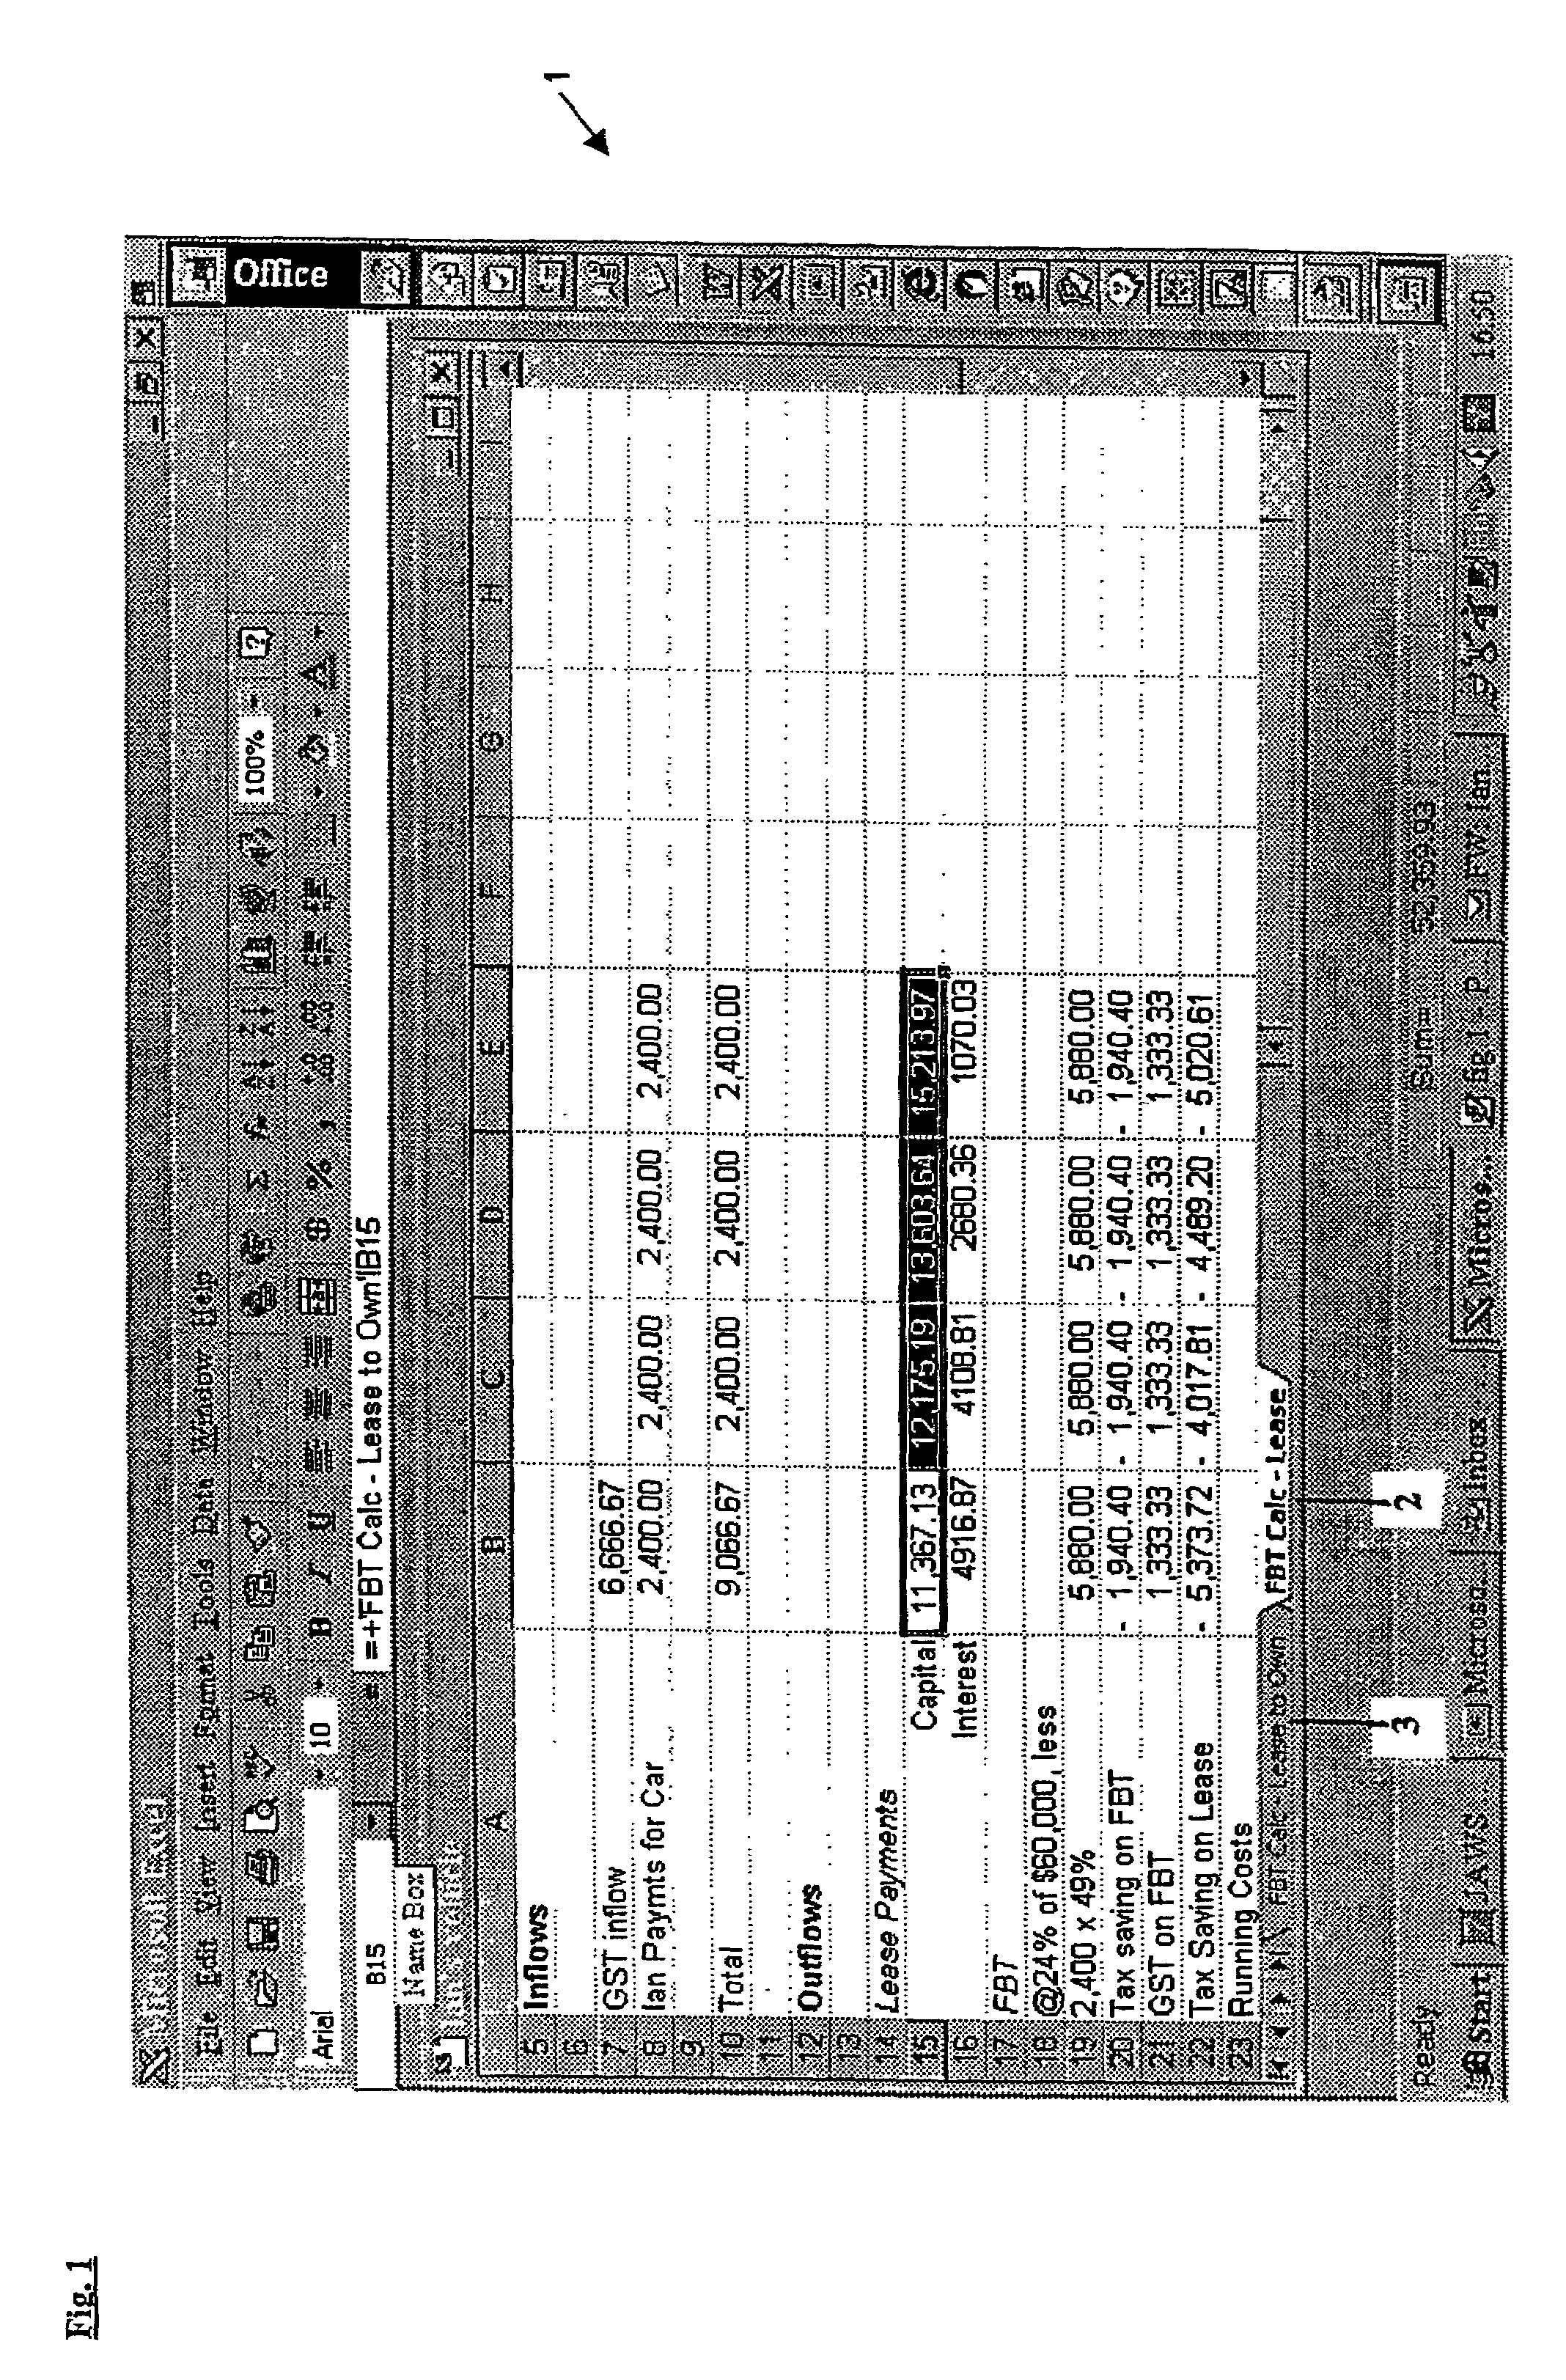 Data display for multiple layered screens